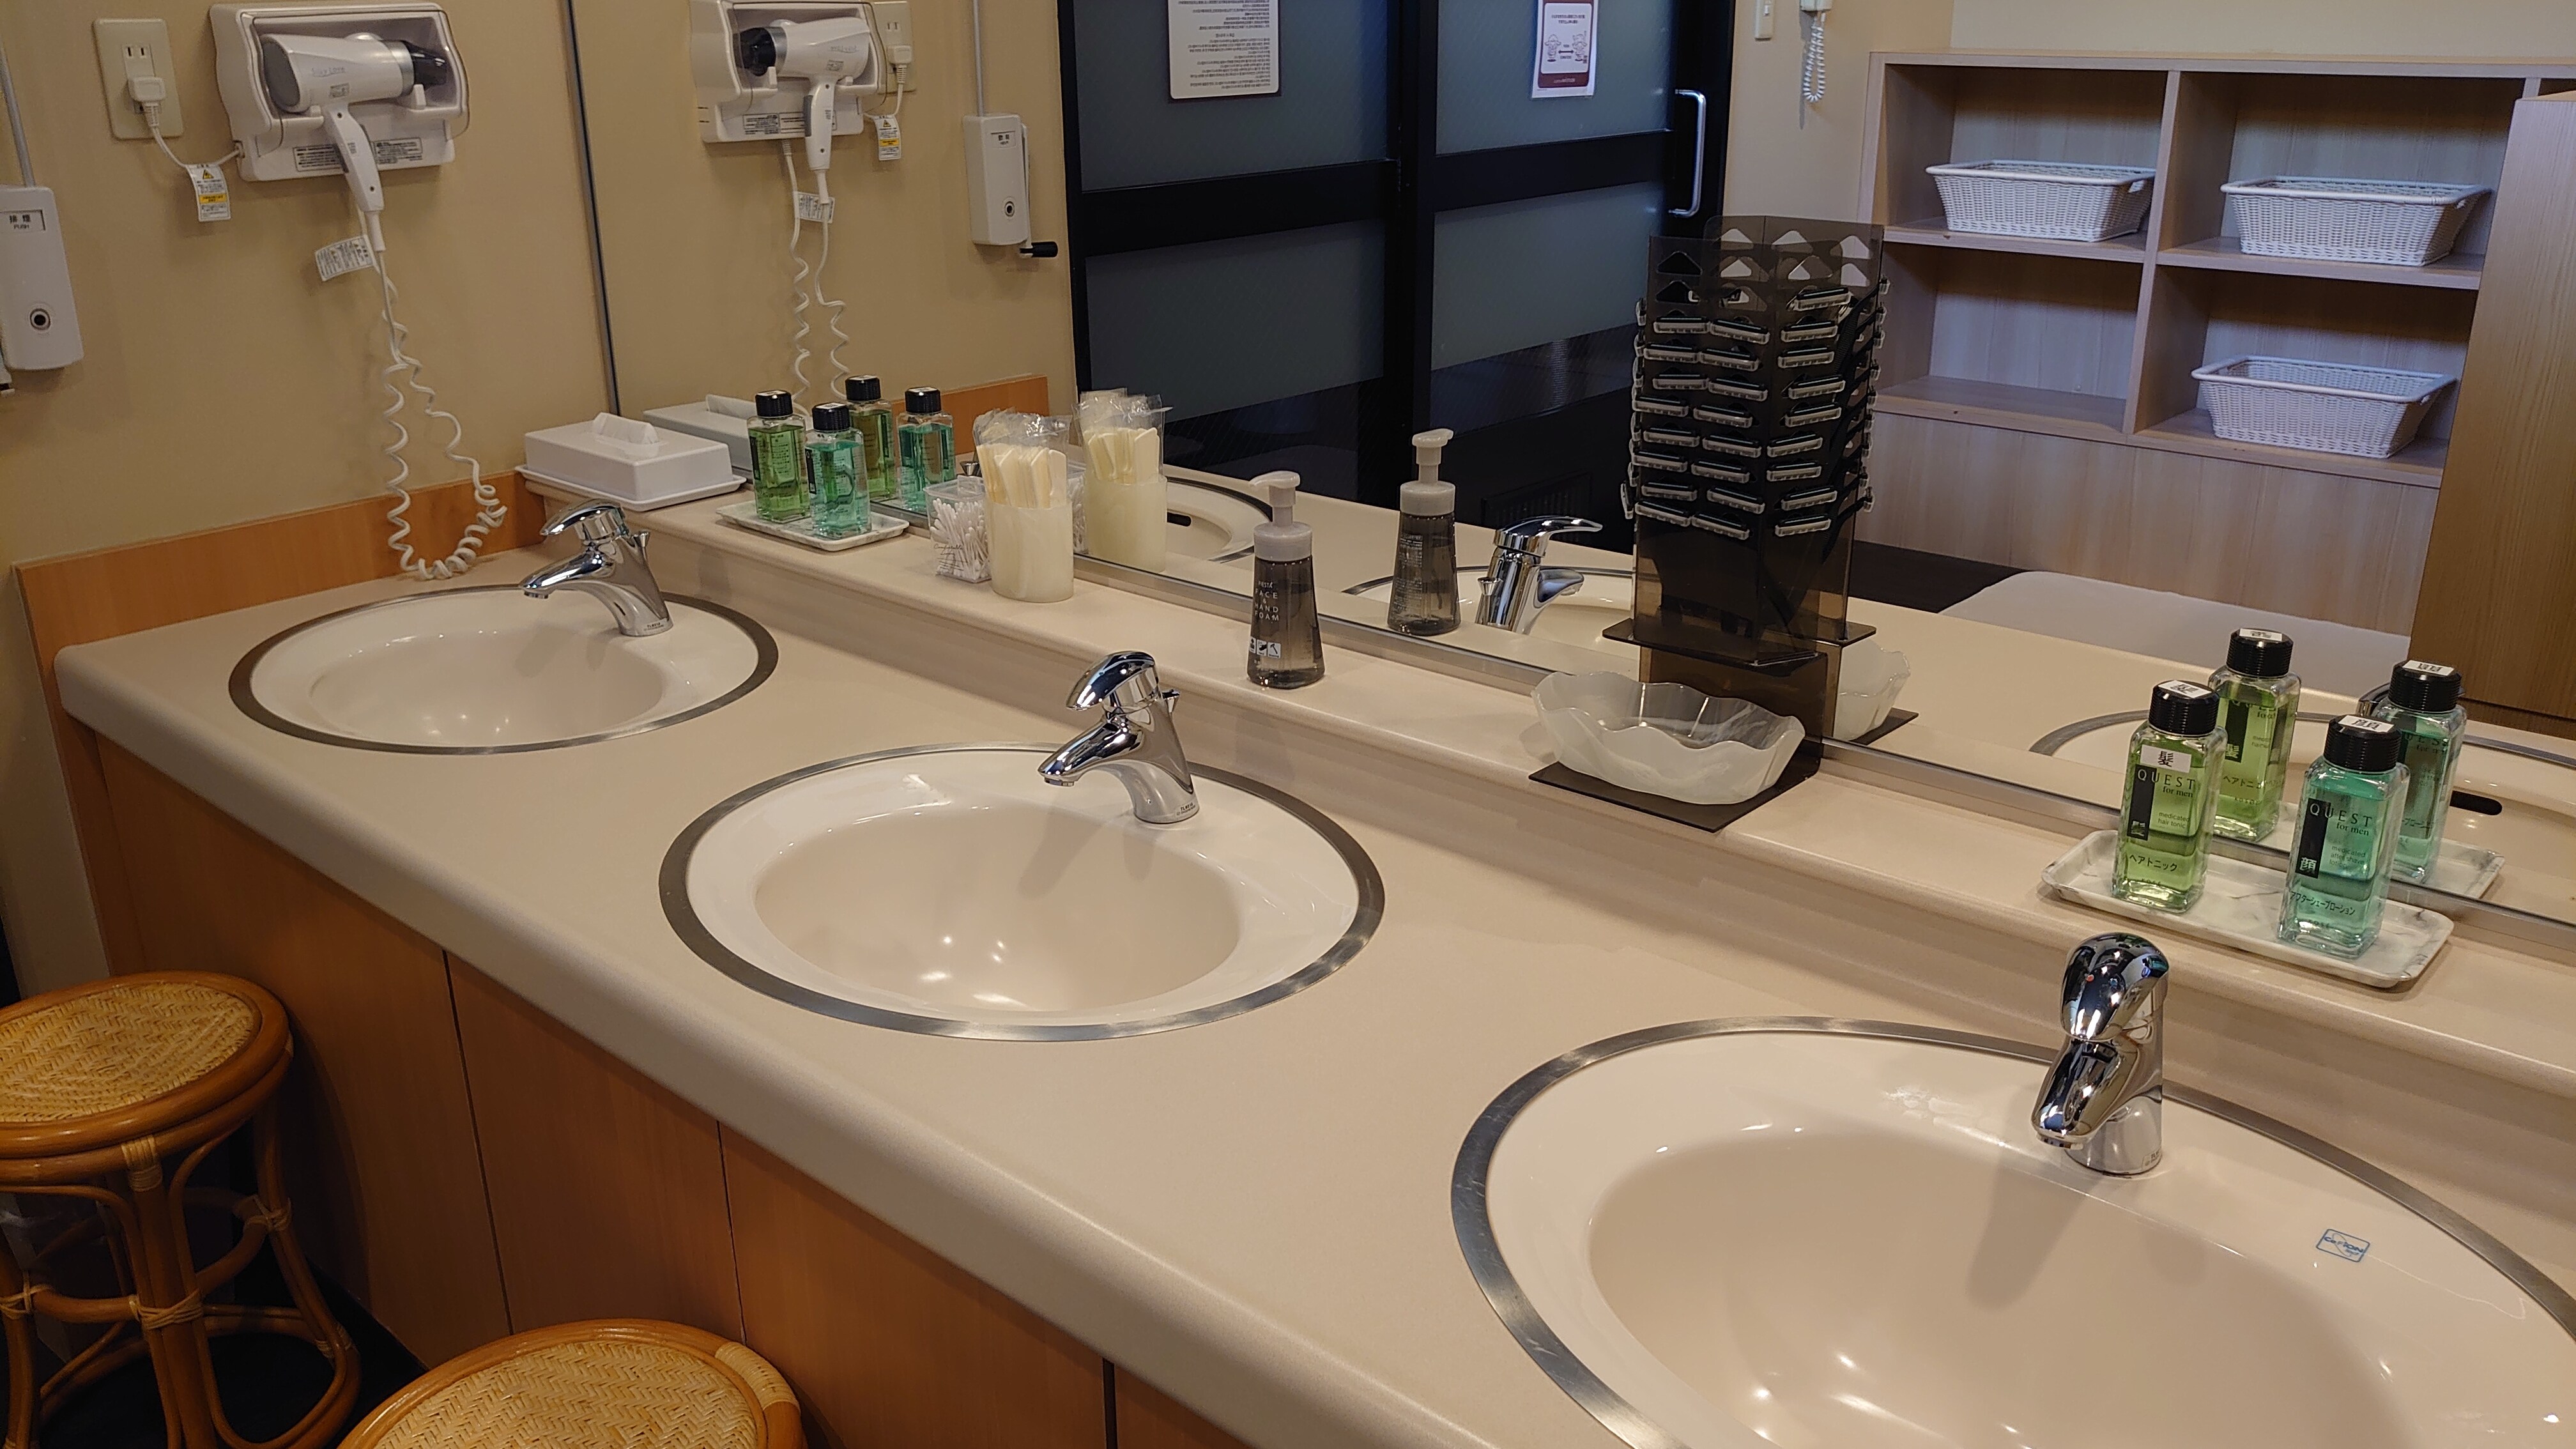 Hair tonics, aftershave lotions, etc. are available in the men's public bath.